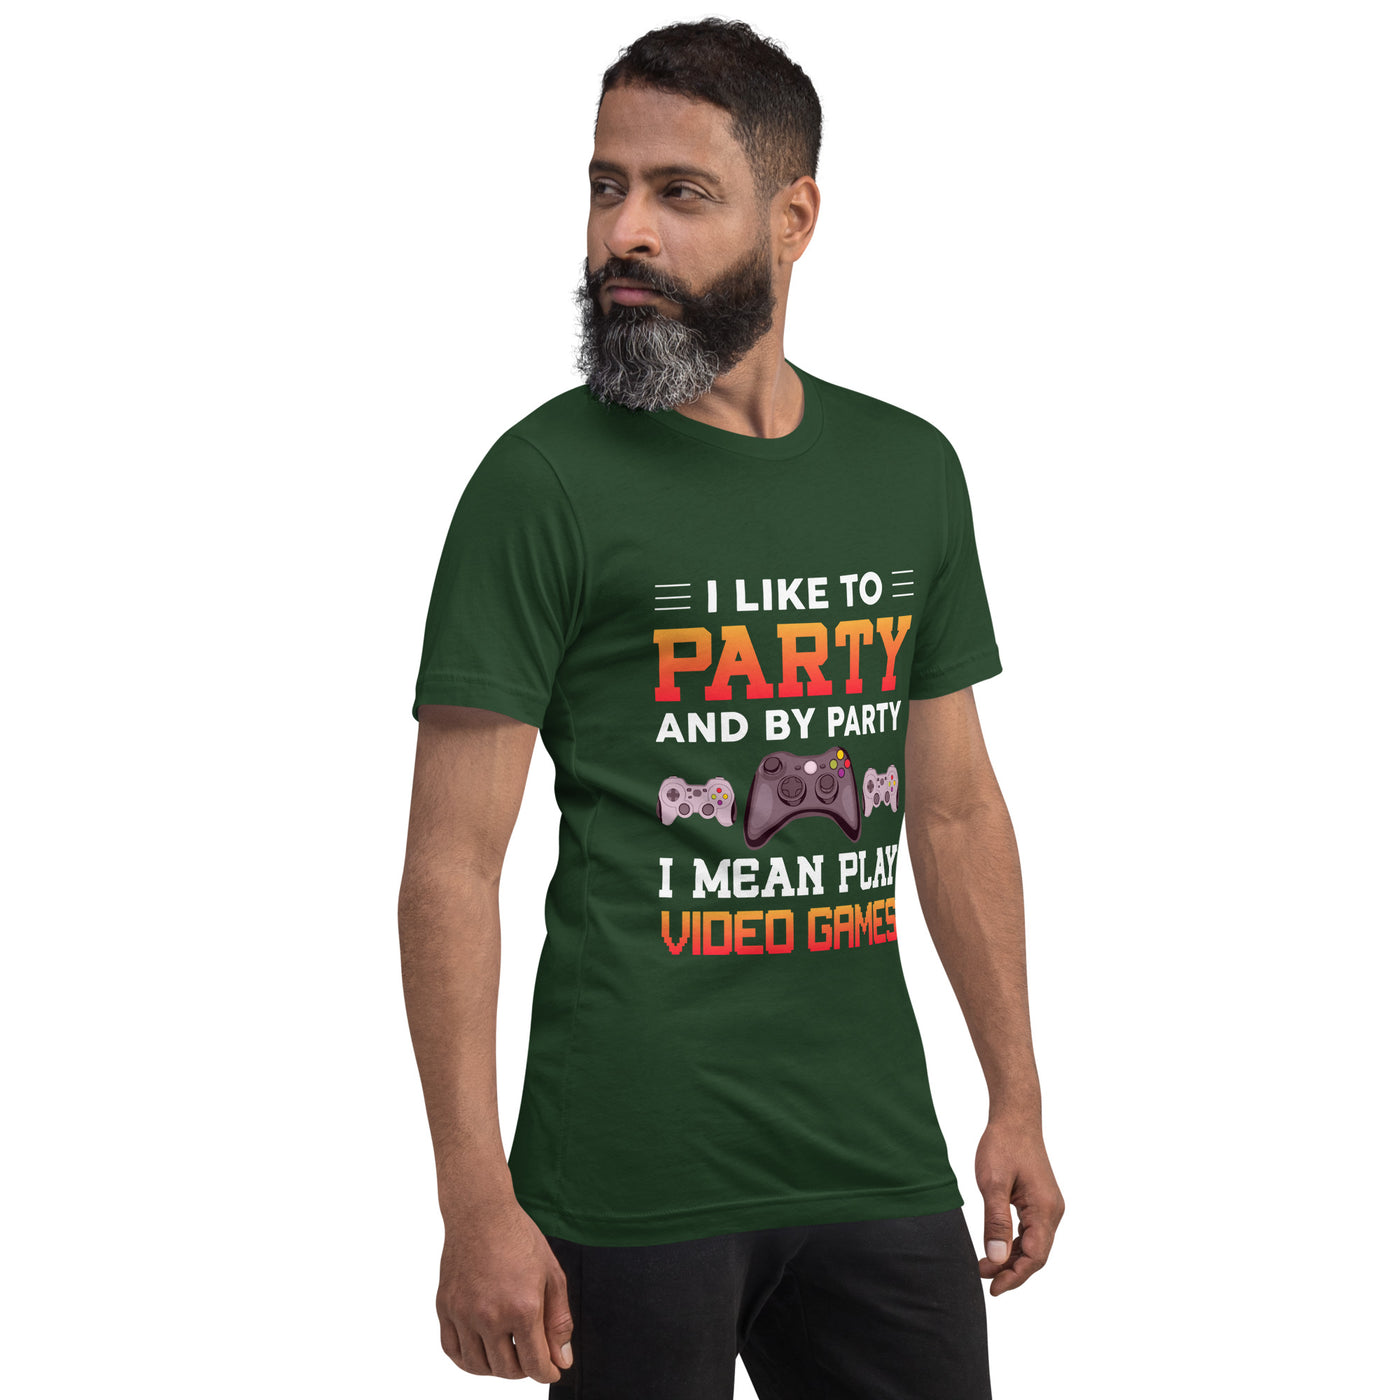 I Like to Party and by Party, I mean Play Video Games - Unisex t-shirt